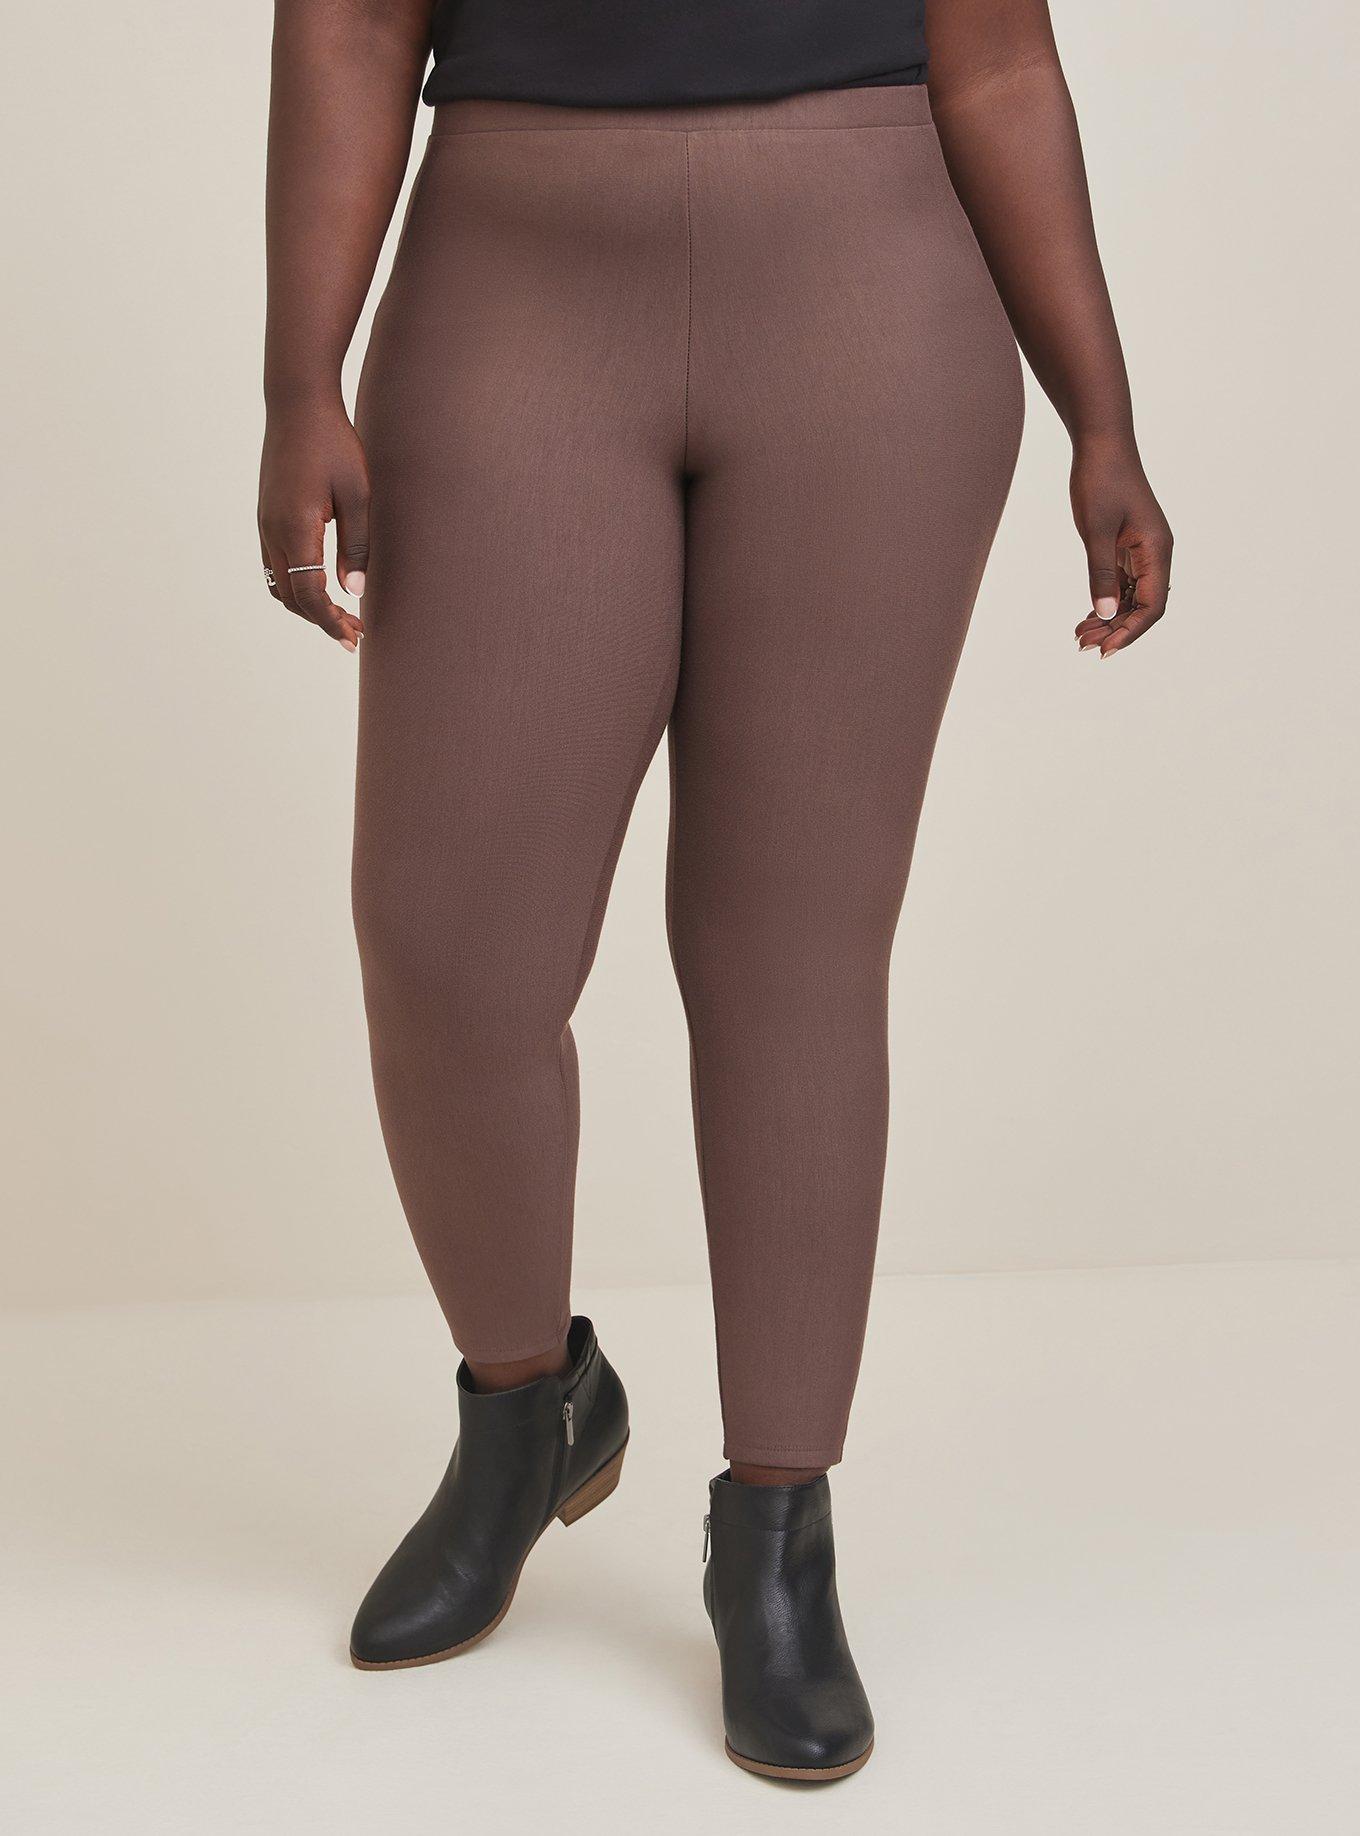 Plus Size Brown Tights Legging Dress Pants Lined Fleece Tights